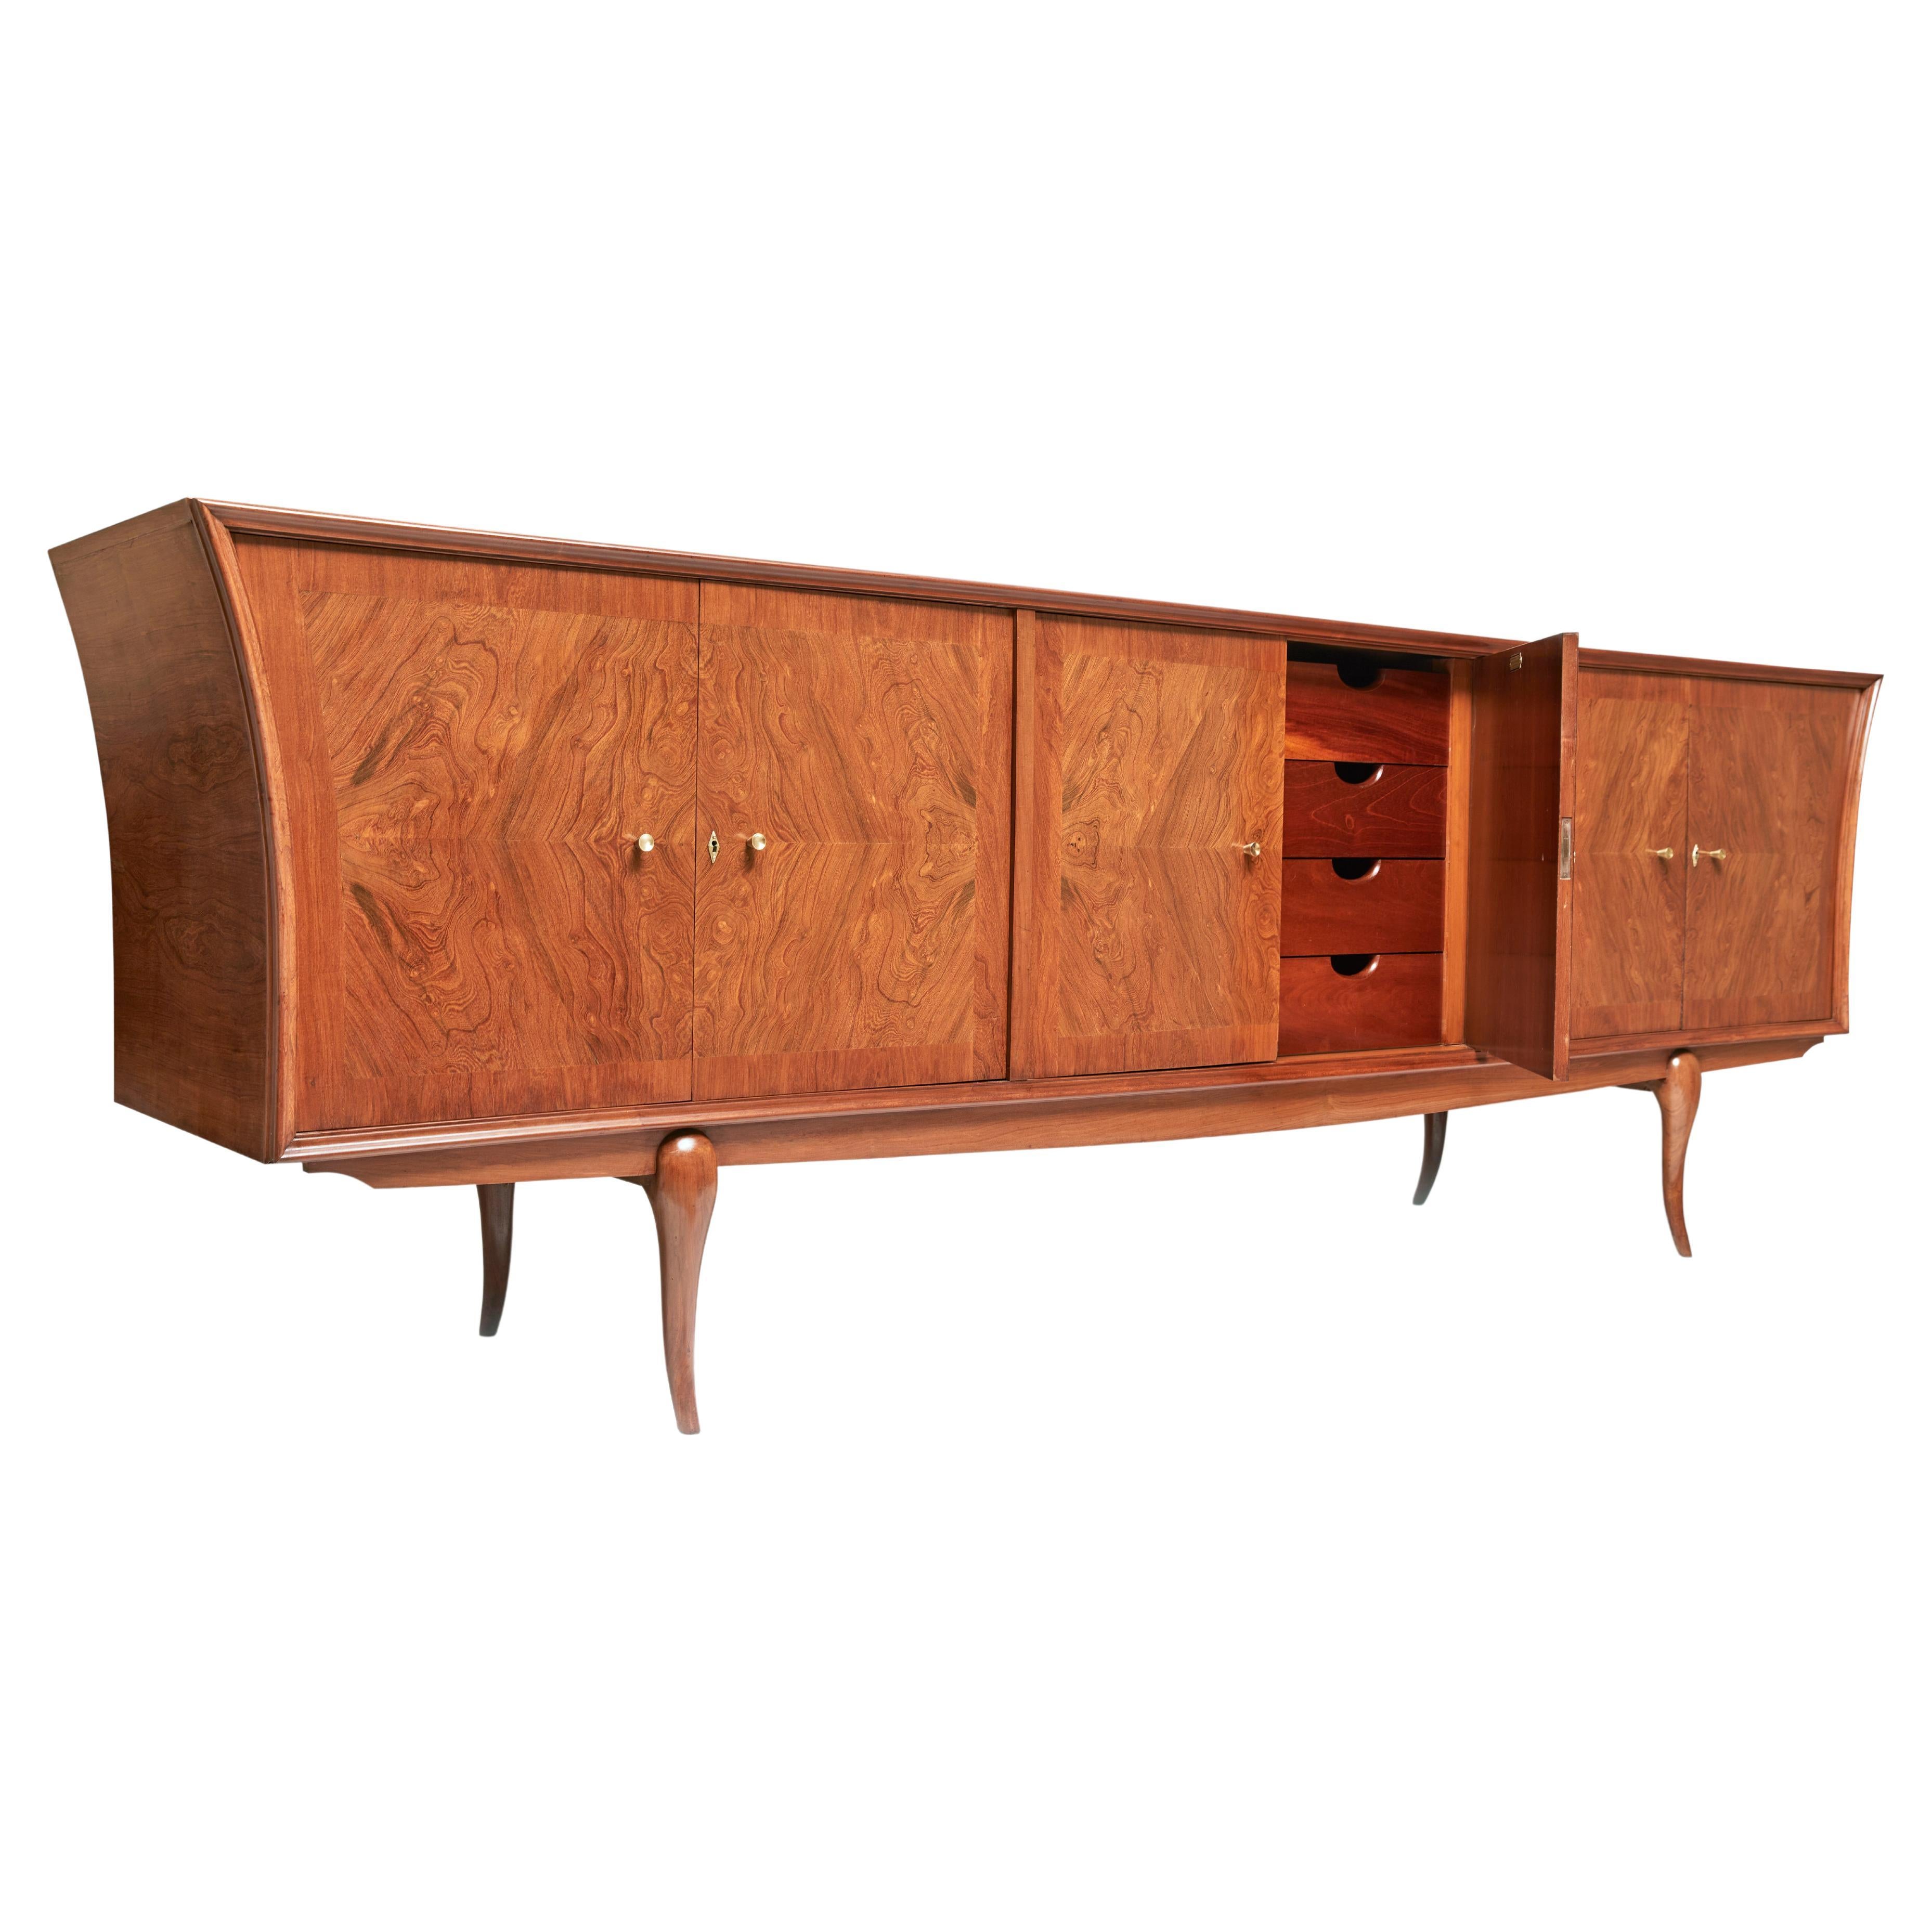 Hand-Crafted Mid-Century Modern Credenza in Caviuna Hardwood by Giuseppe Scapinelli, 1956 For Sale